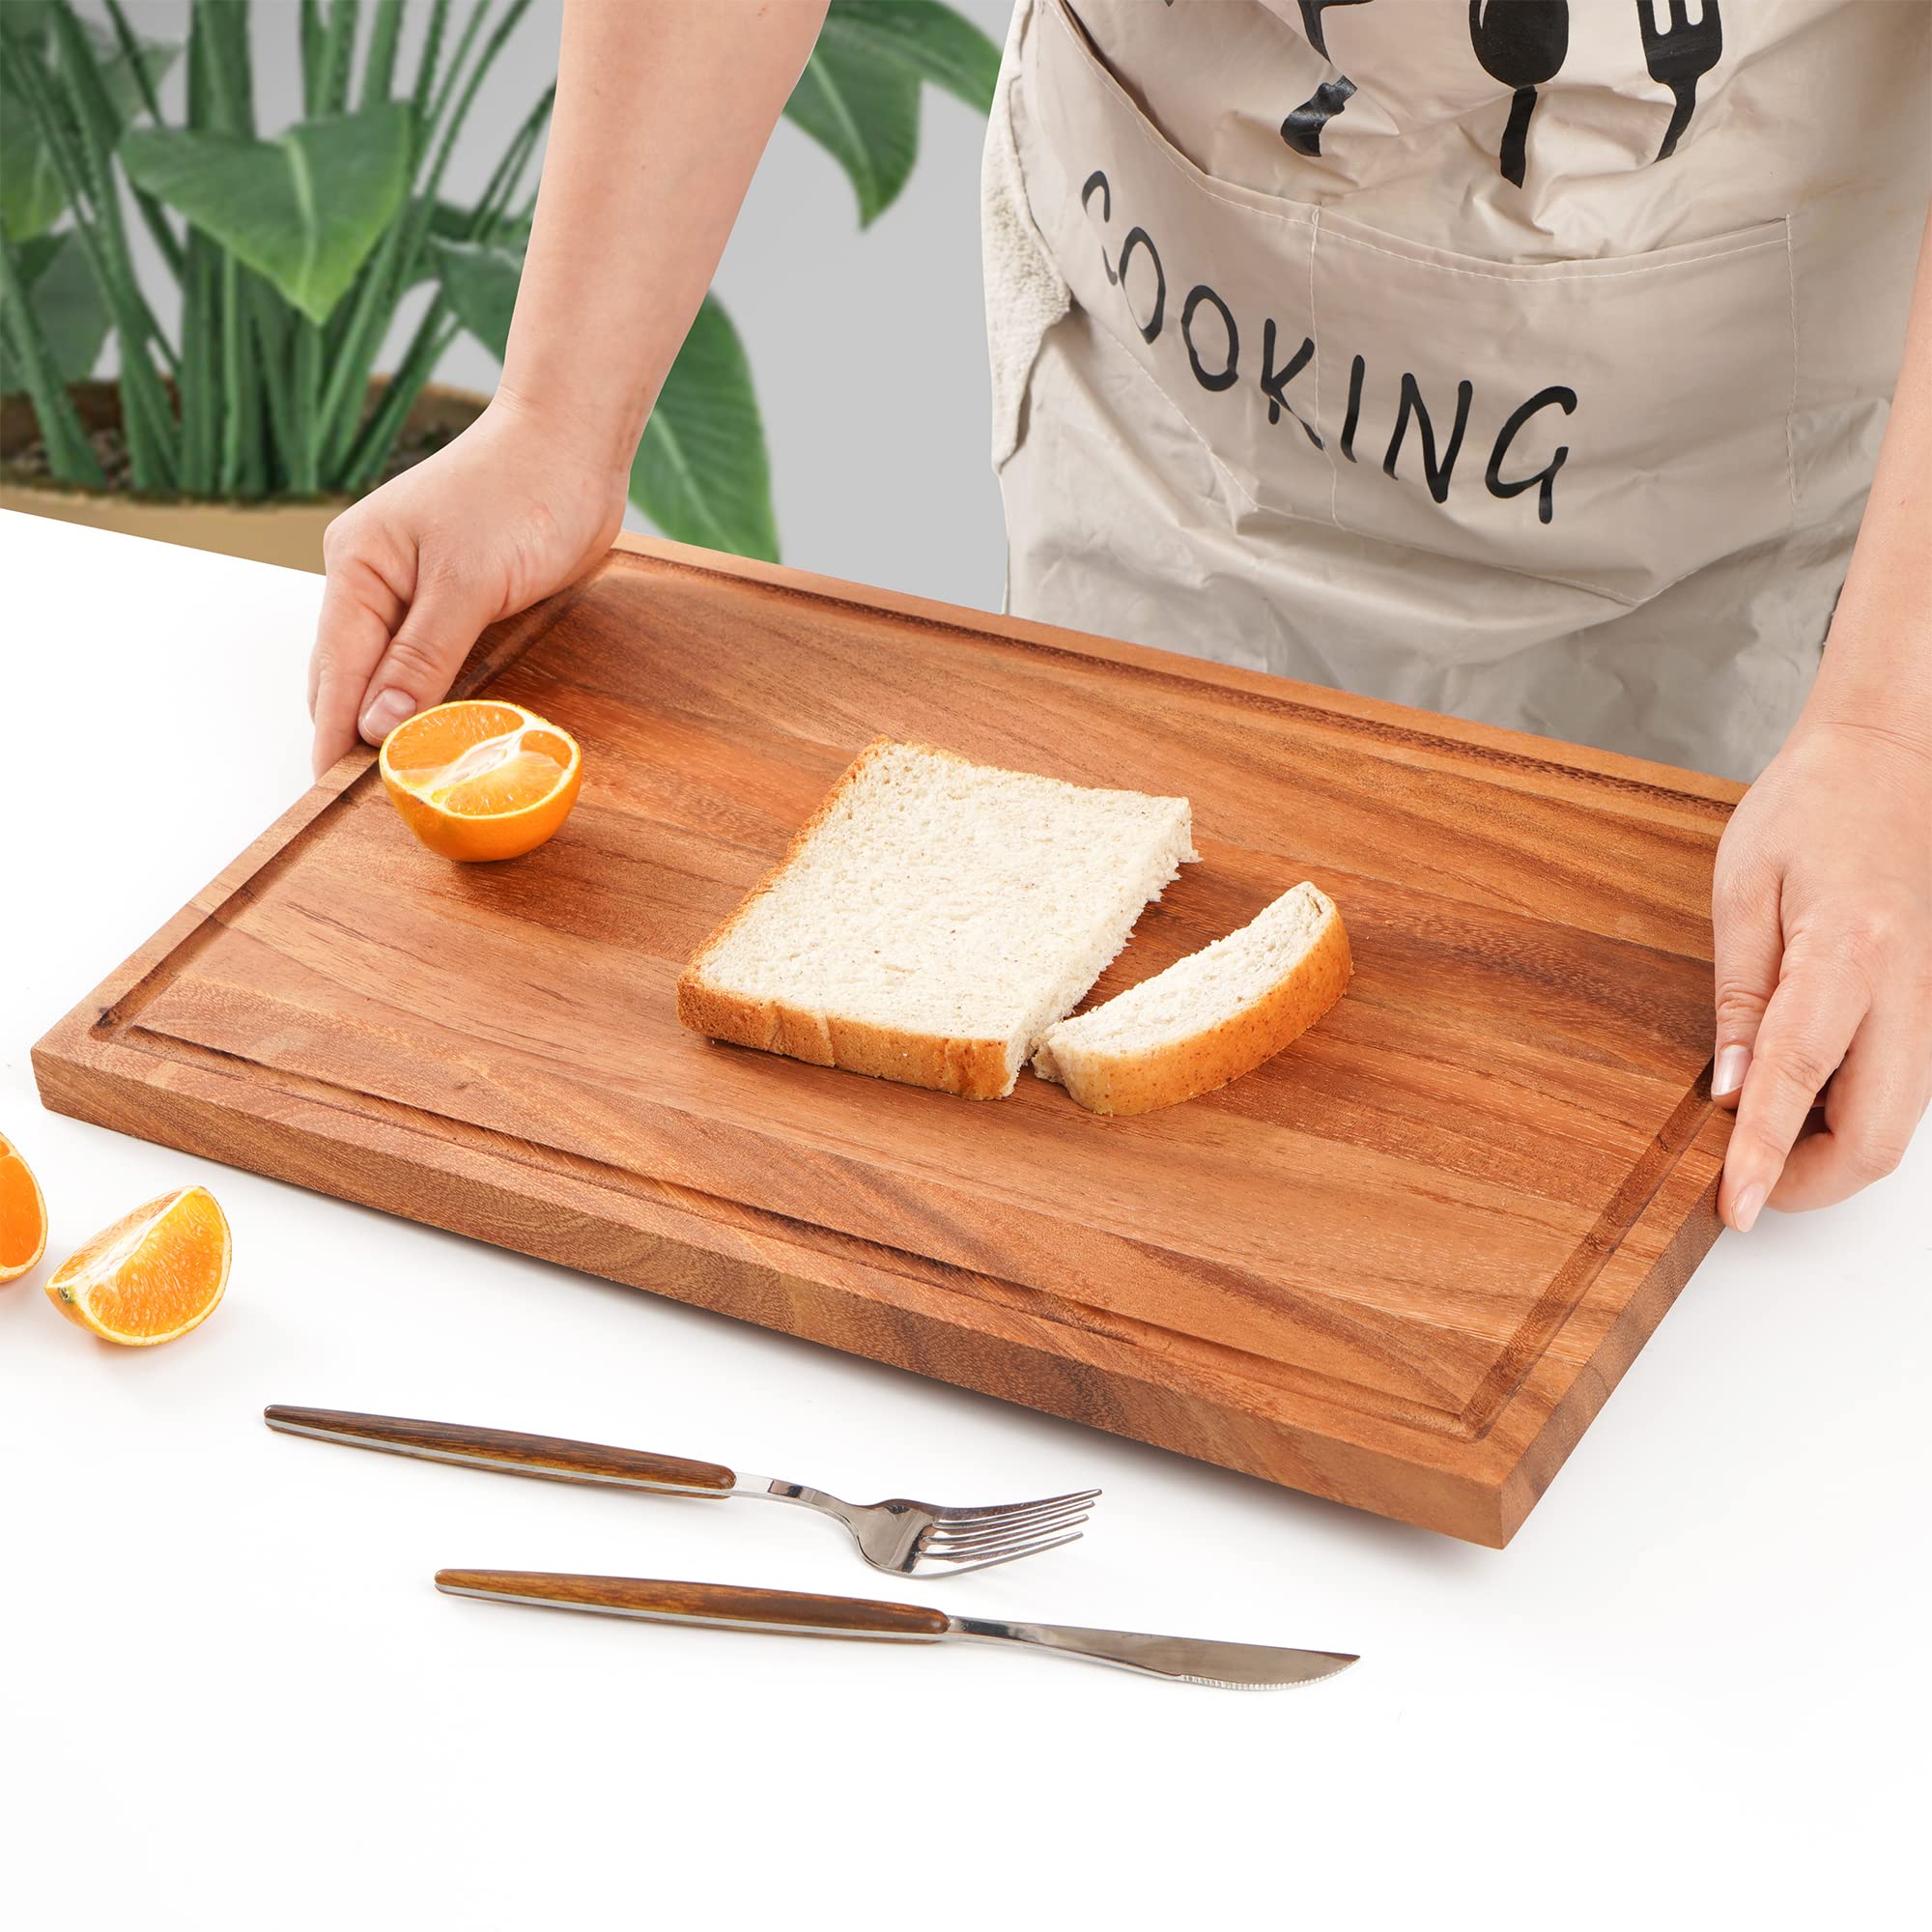 YIFAN Best Walnut Wood Cutting Board for Kitchen Reversible Wooden Chopping Board With Juice Grooves Butcher Block Wooden Try boards for Christmas Present Gift(17 x 11 x 1inches)